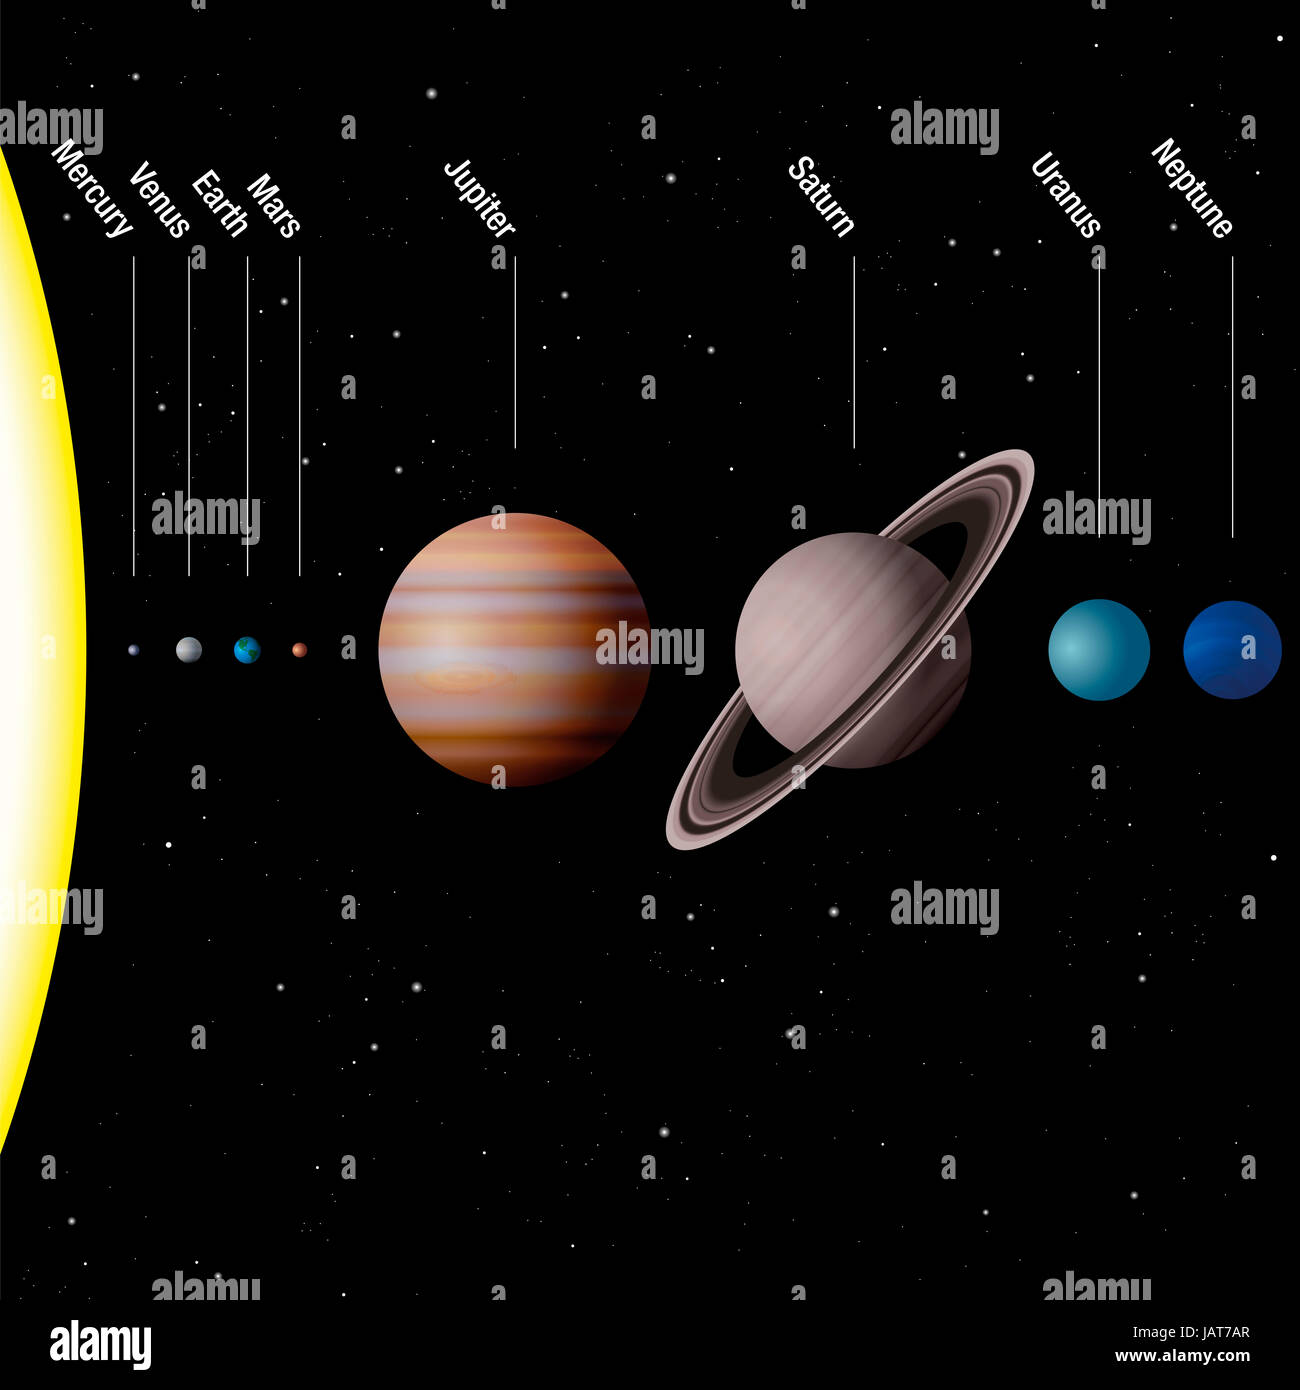 Planets of our solar system - true to scale - Sun and eight planets Mercury, Venus, Earth, Mars, Jupiter, Saturn, Uranus, Neptune. Stock Photo